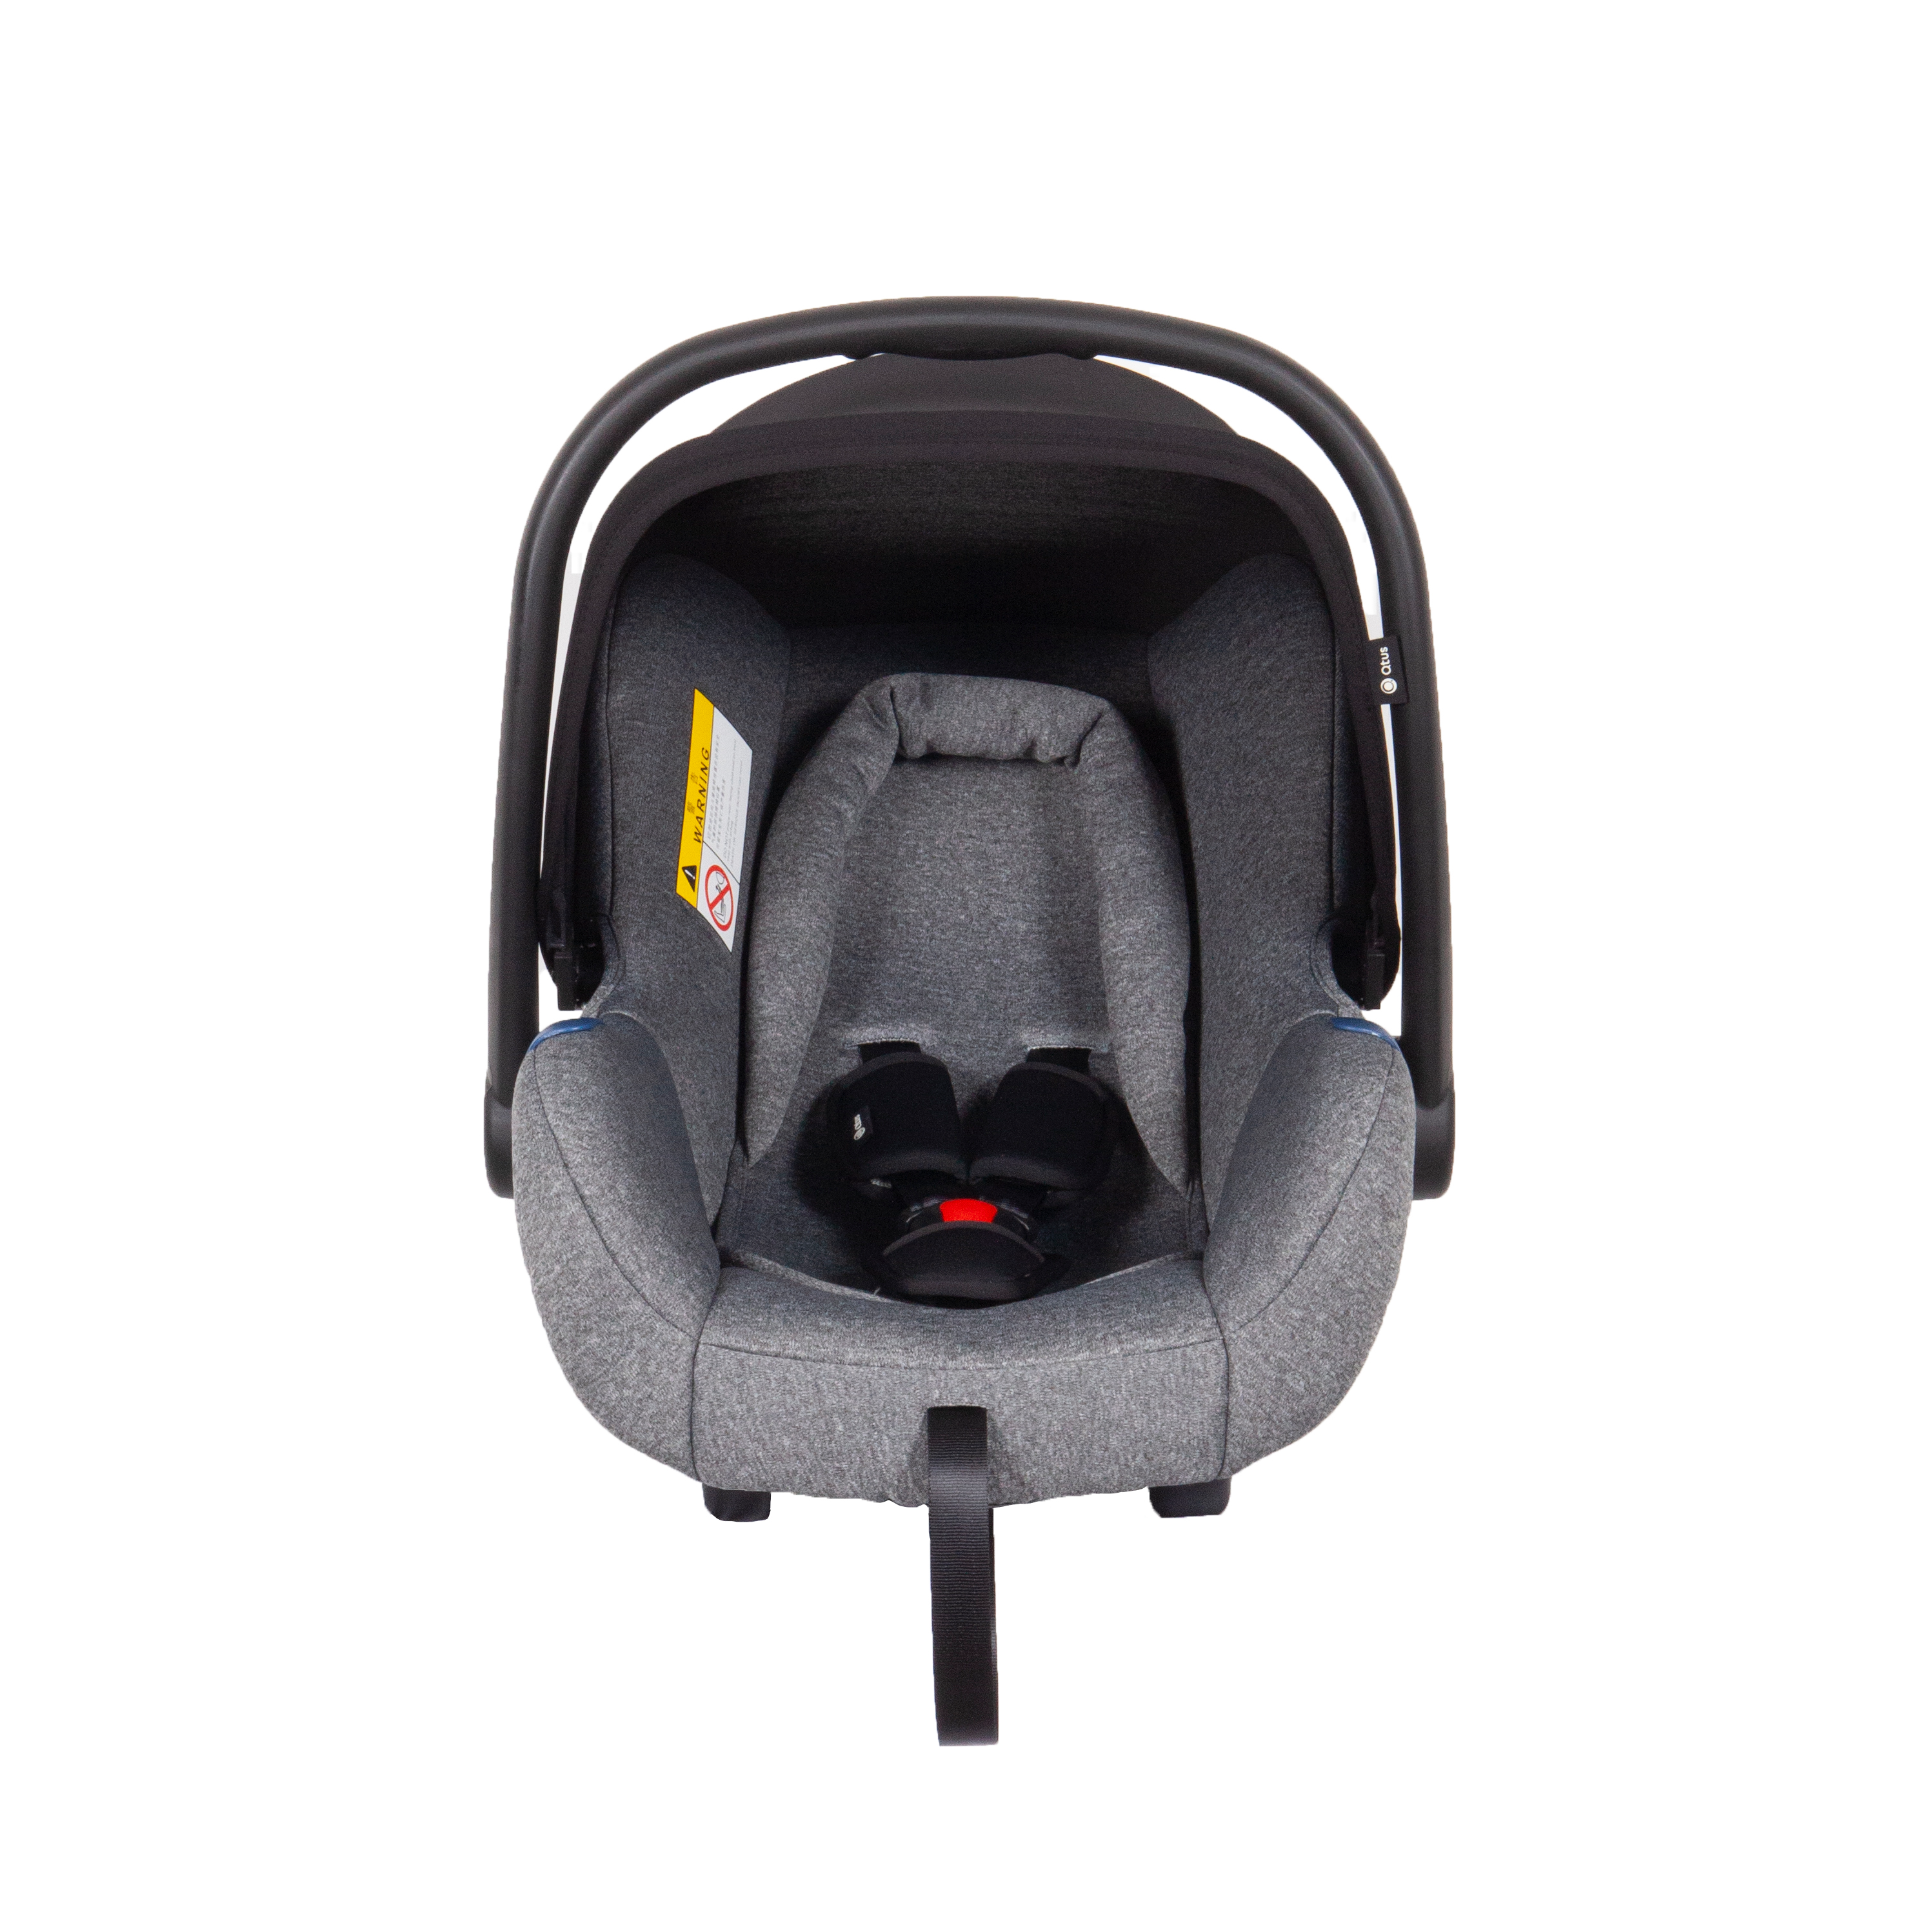 Grey Portable Infant Car Seat for Small Cars